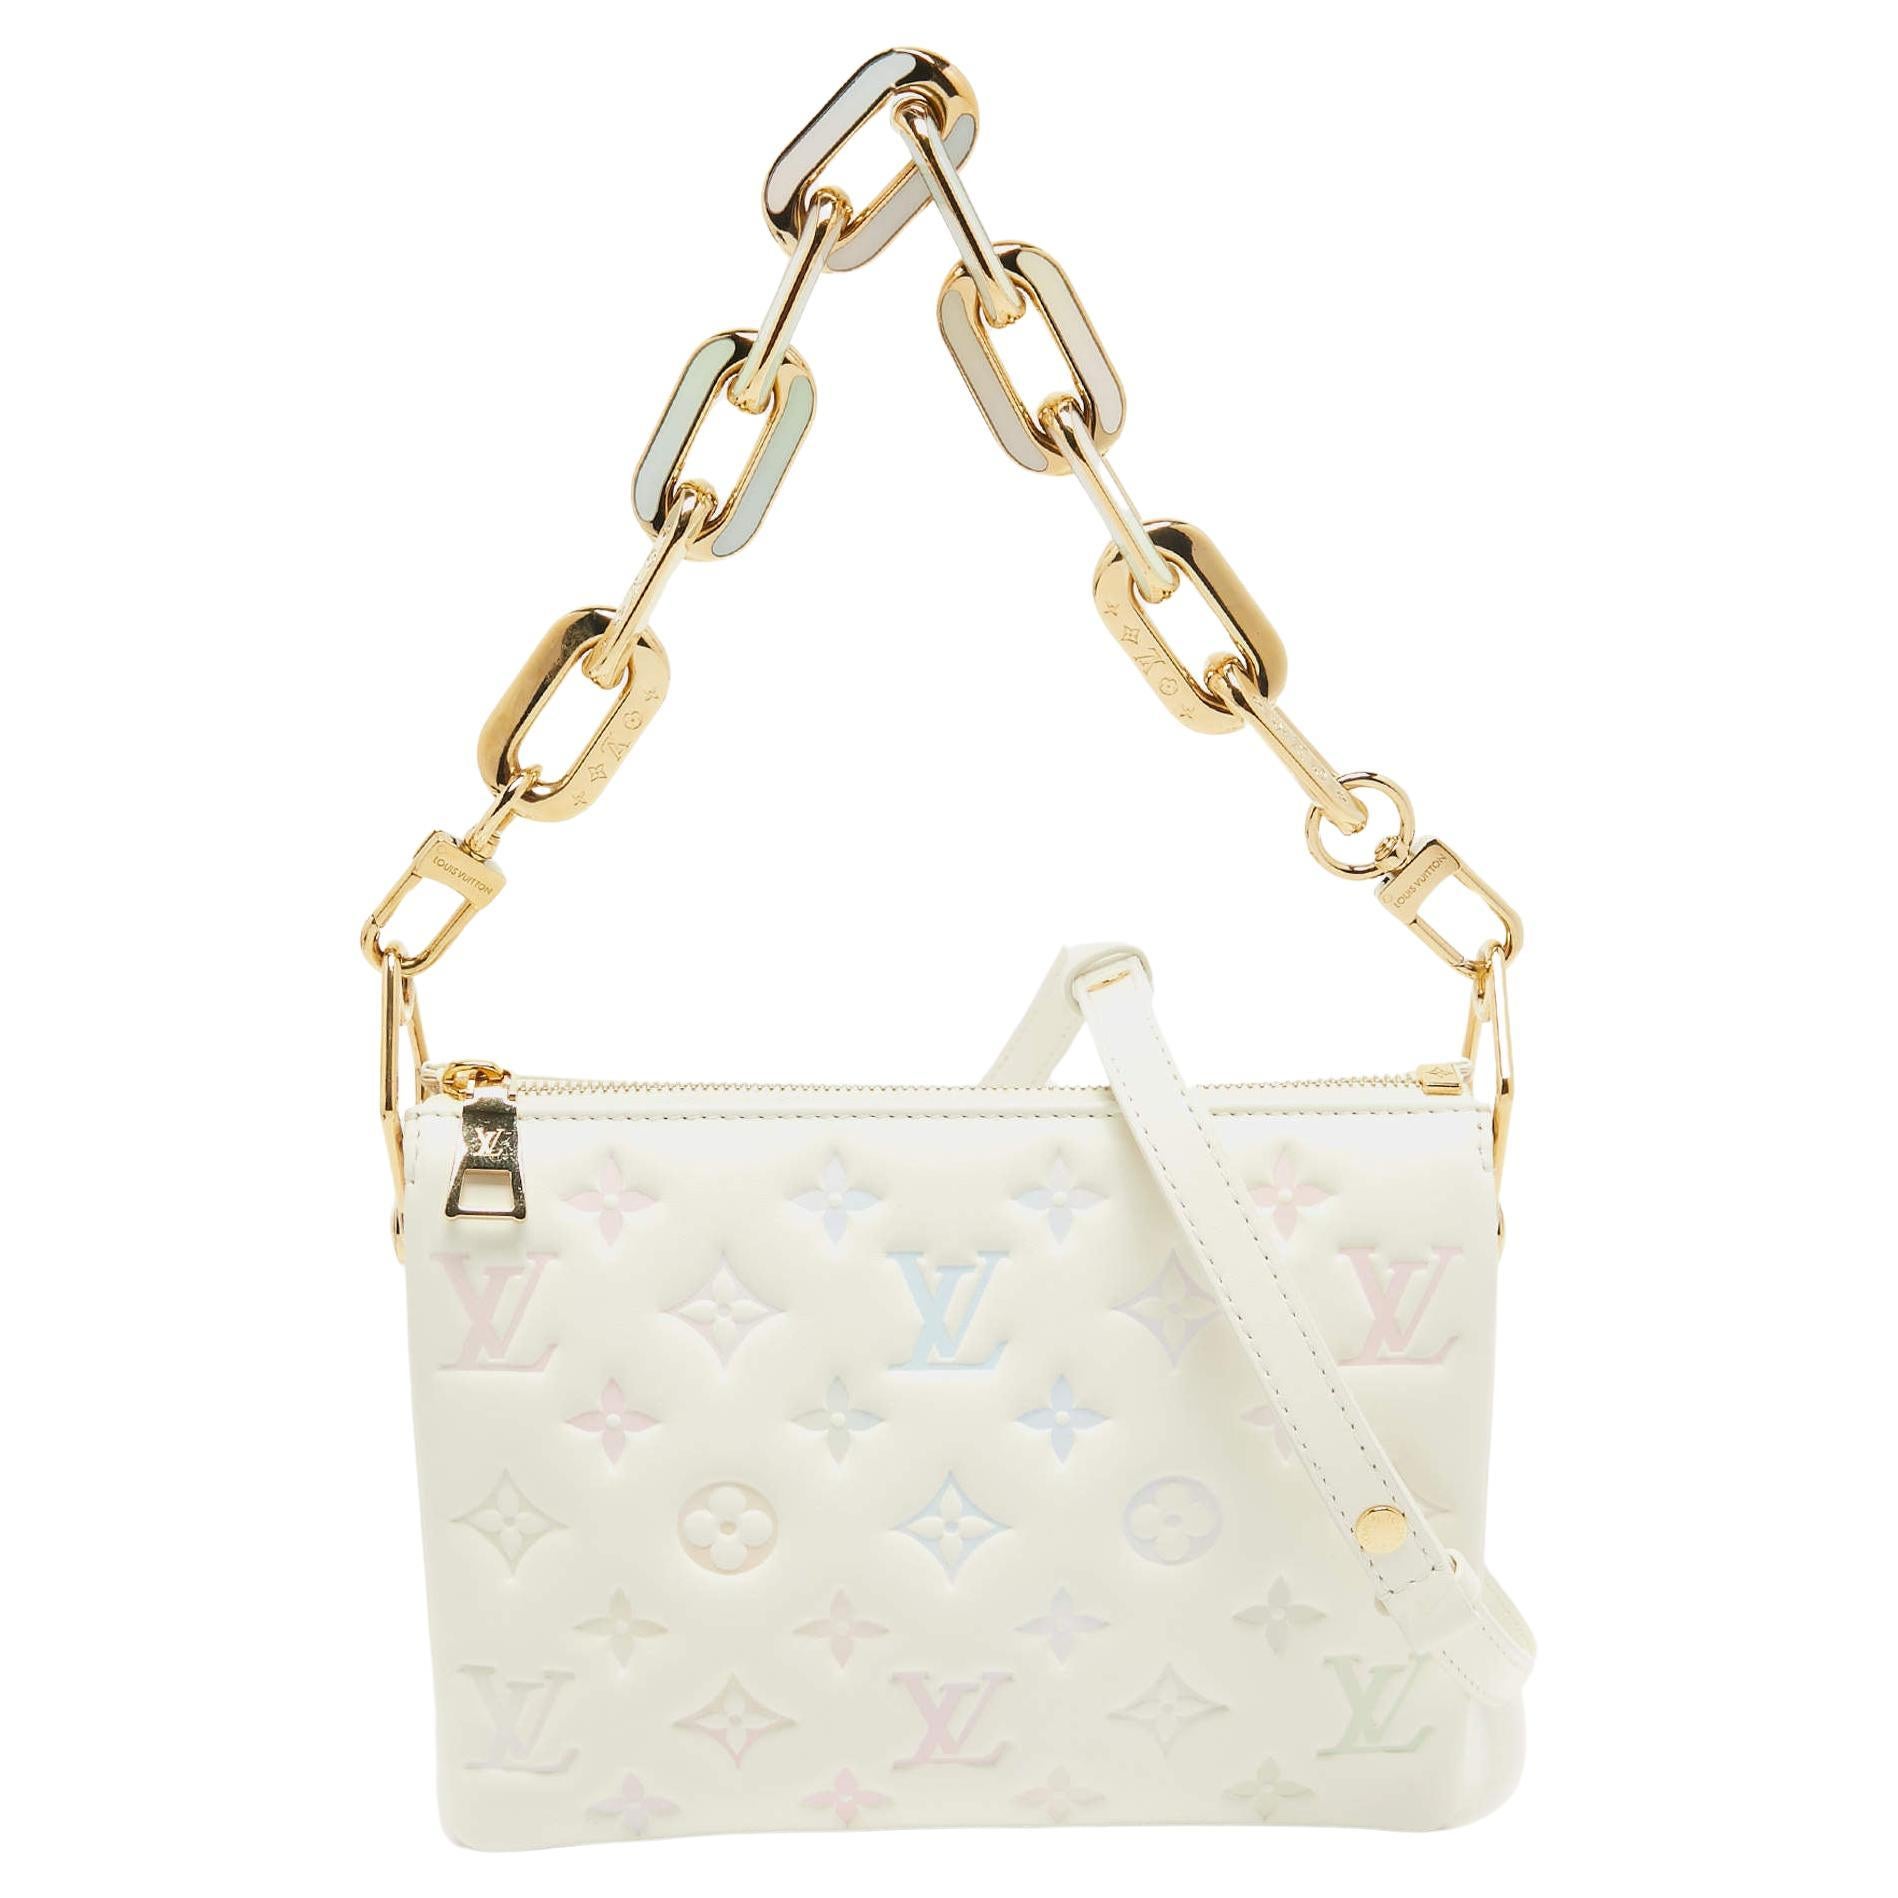 Louis Vuitton Milky Way Monogram Embossed Puffy Leather Coussin BB Bag